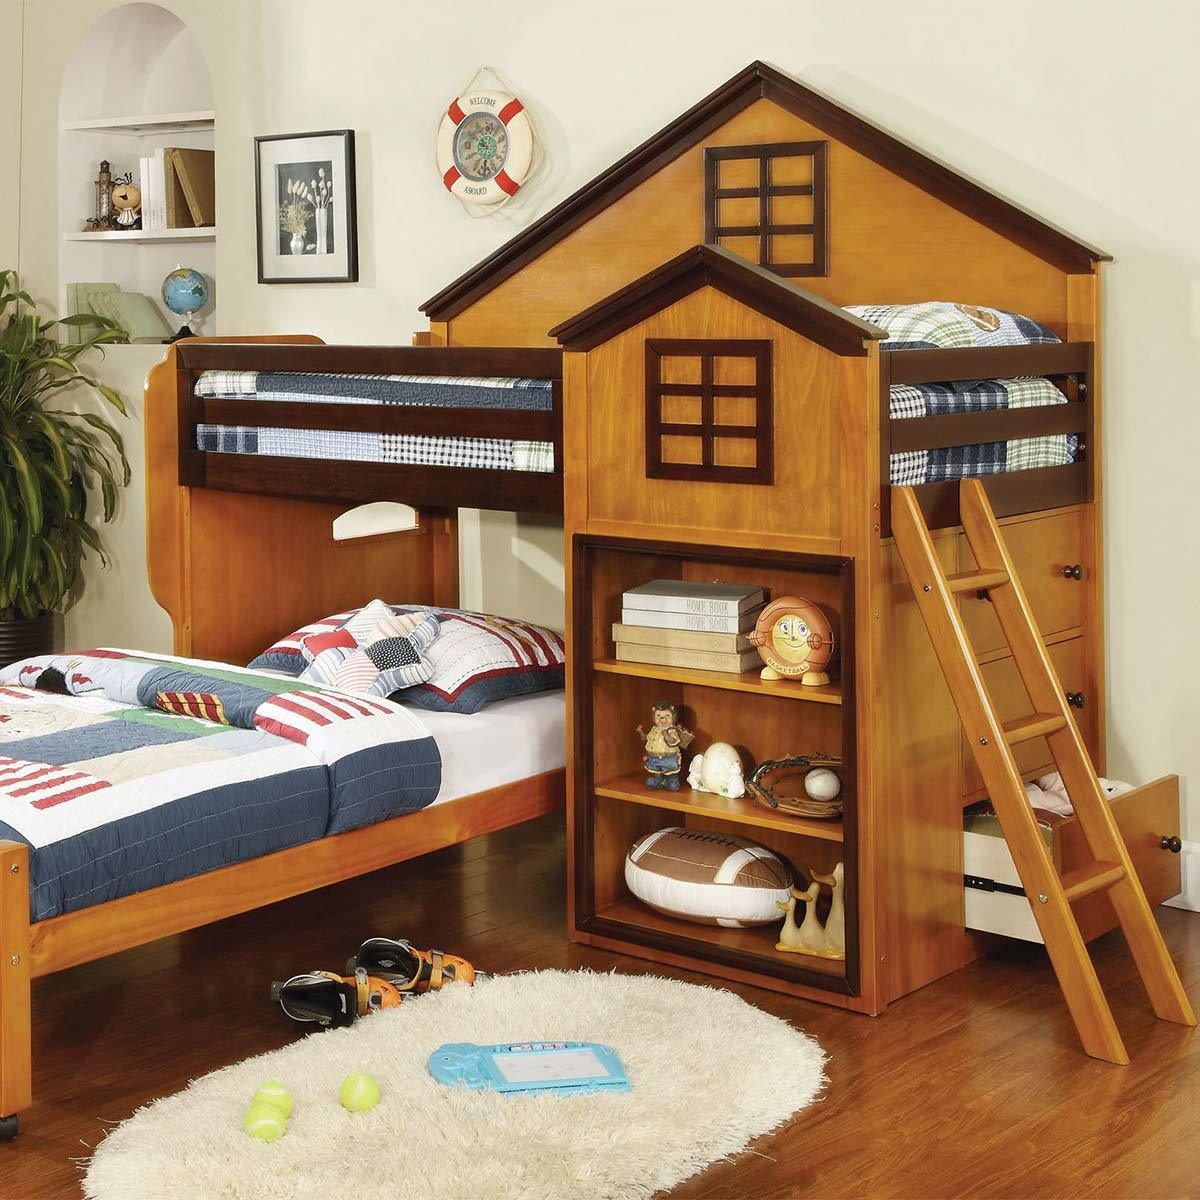 14 of the Coolest Beds You can Buy Today — The Family Handyman